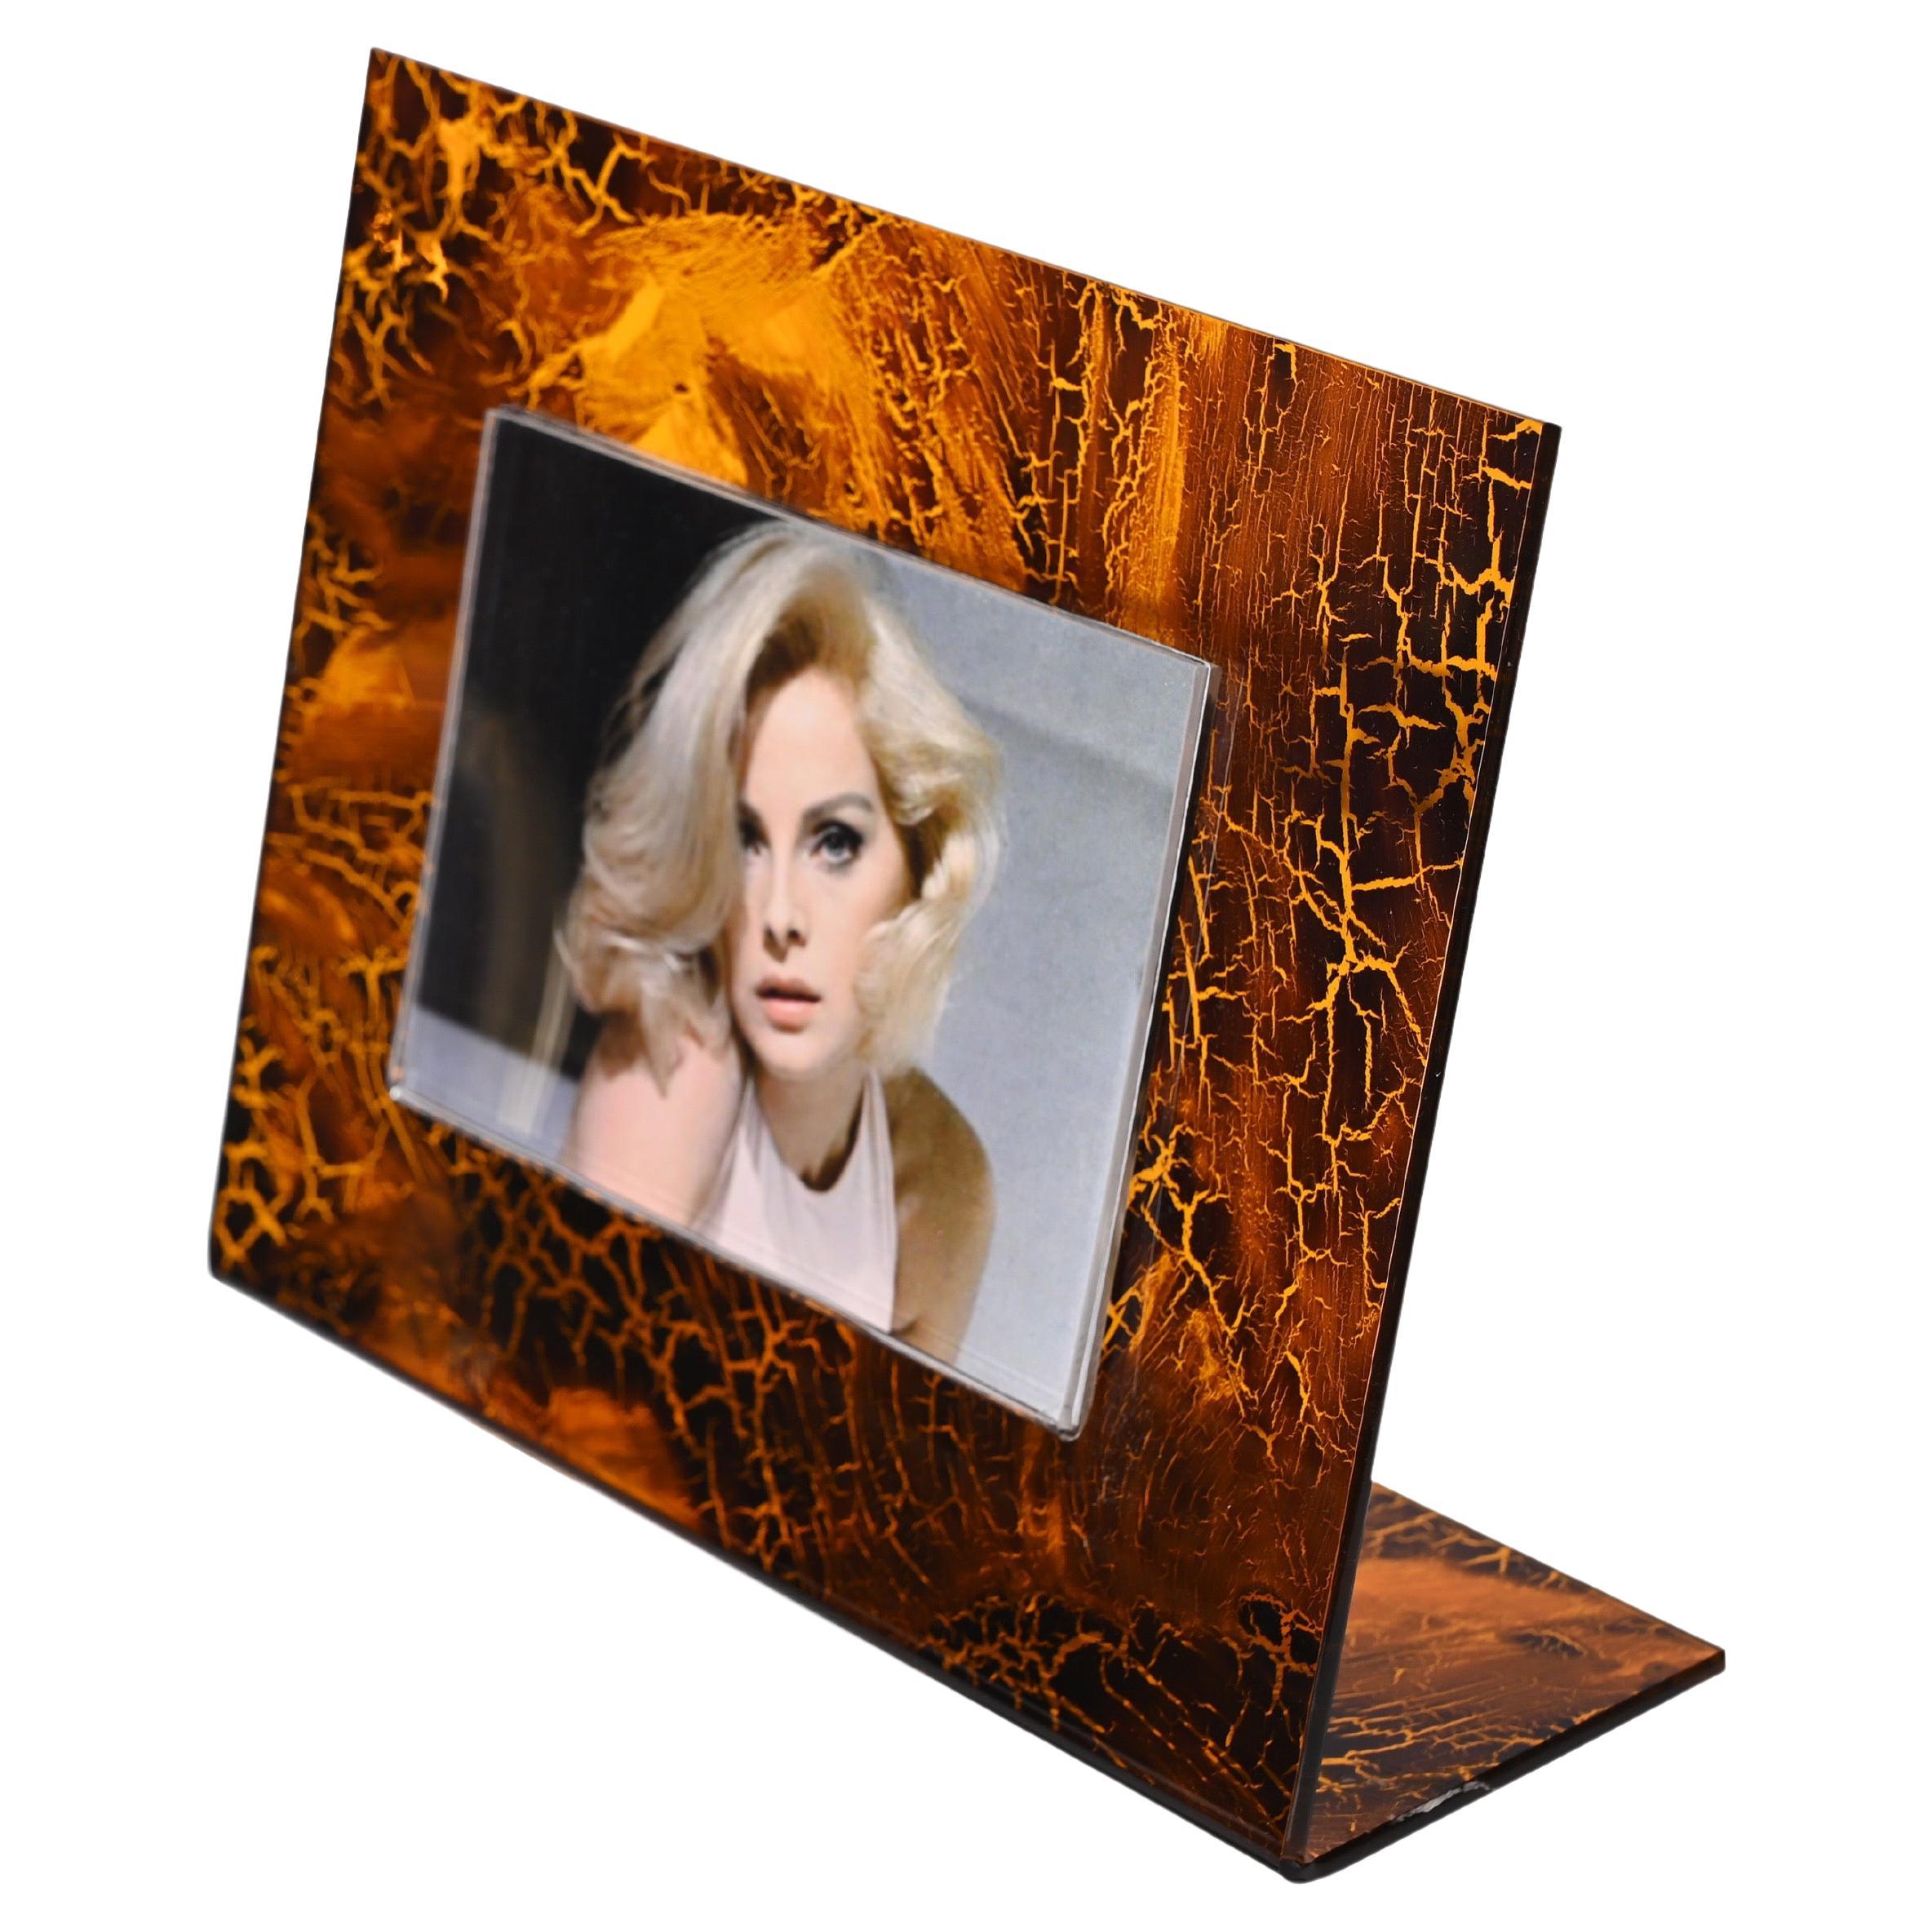 Gabriella Crespi Style Photo Frame in Lucite Tortoiseshell, Italy, 1970s For Sale 5